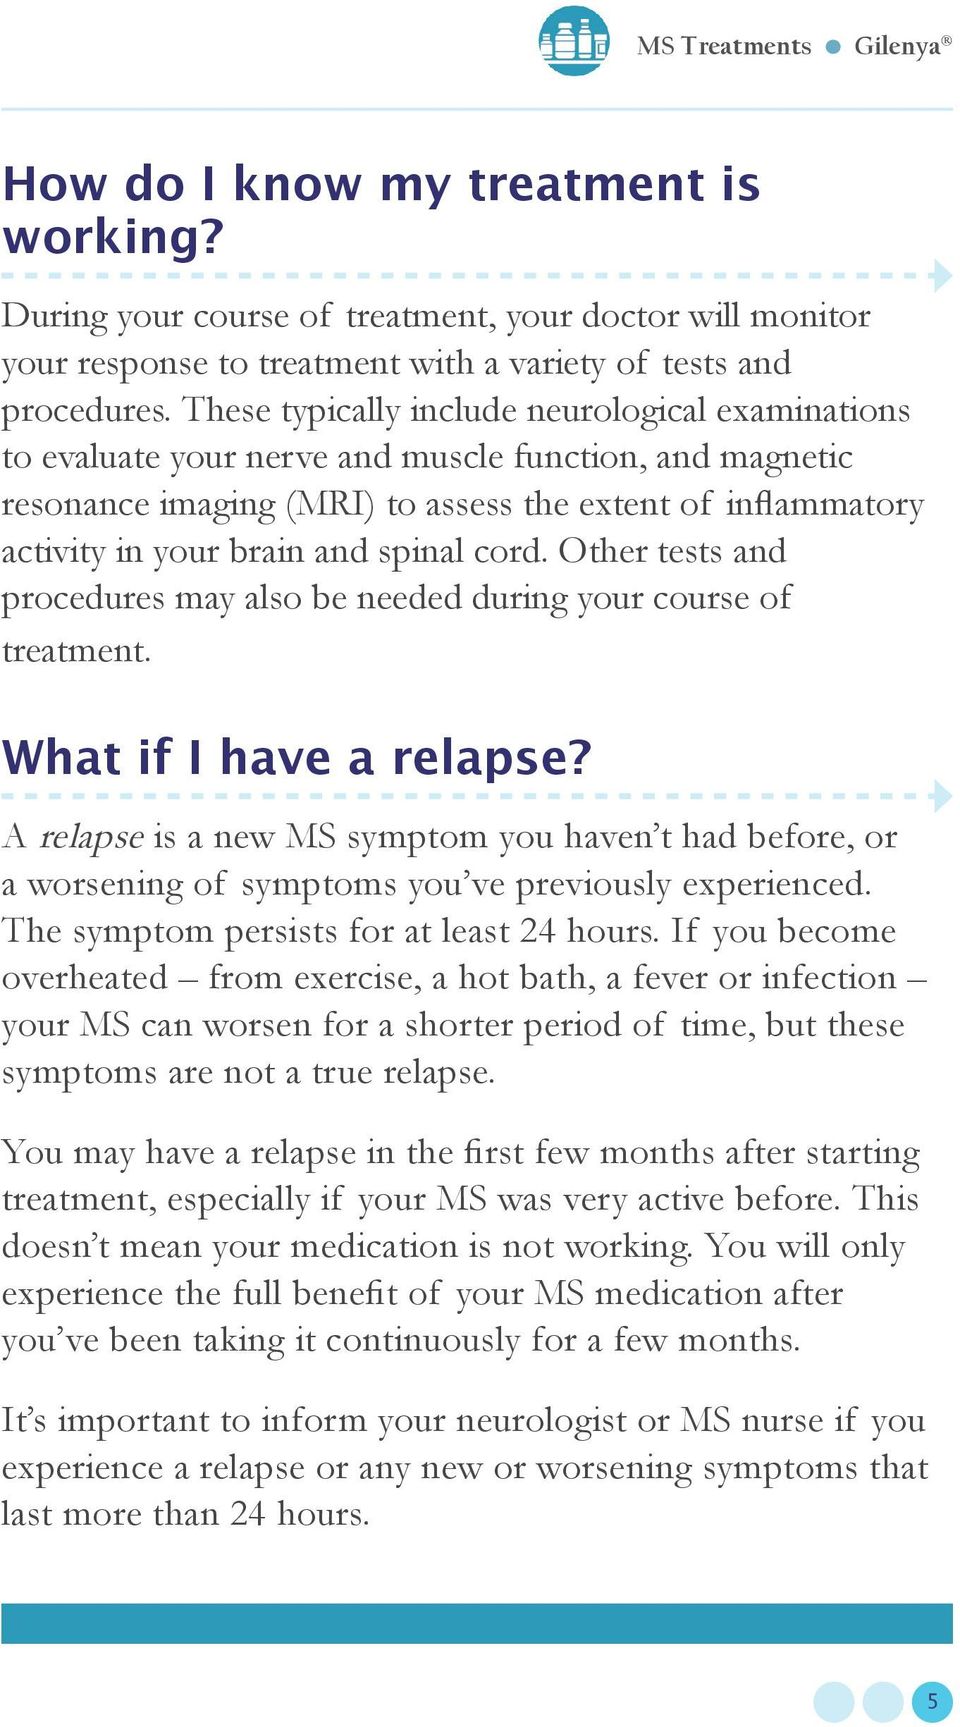 spinal cord. Other tests and procedures may also be needed during your course of treatment. What if I have a relapse?